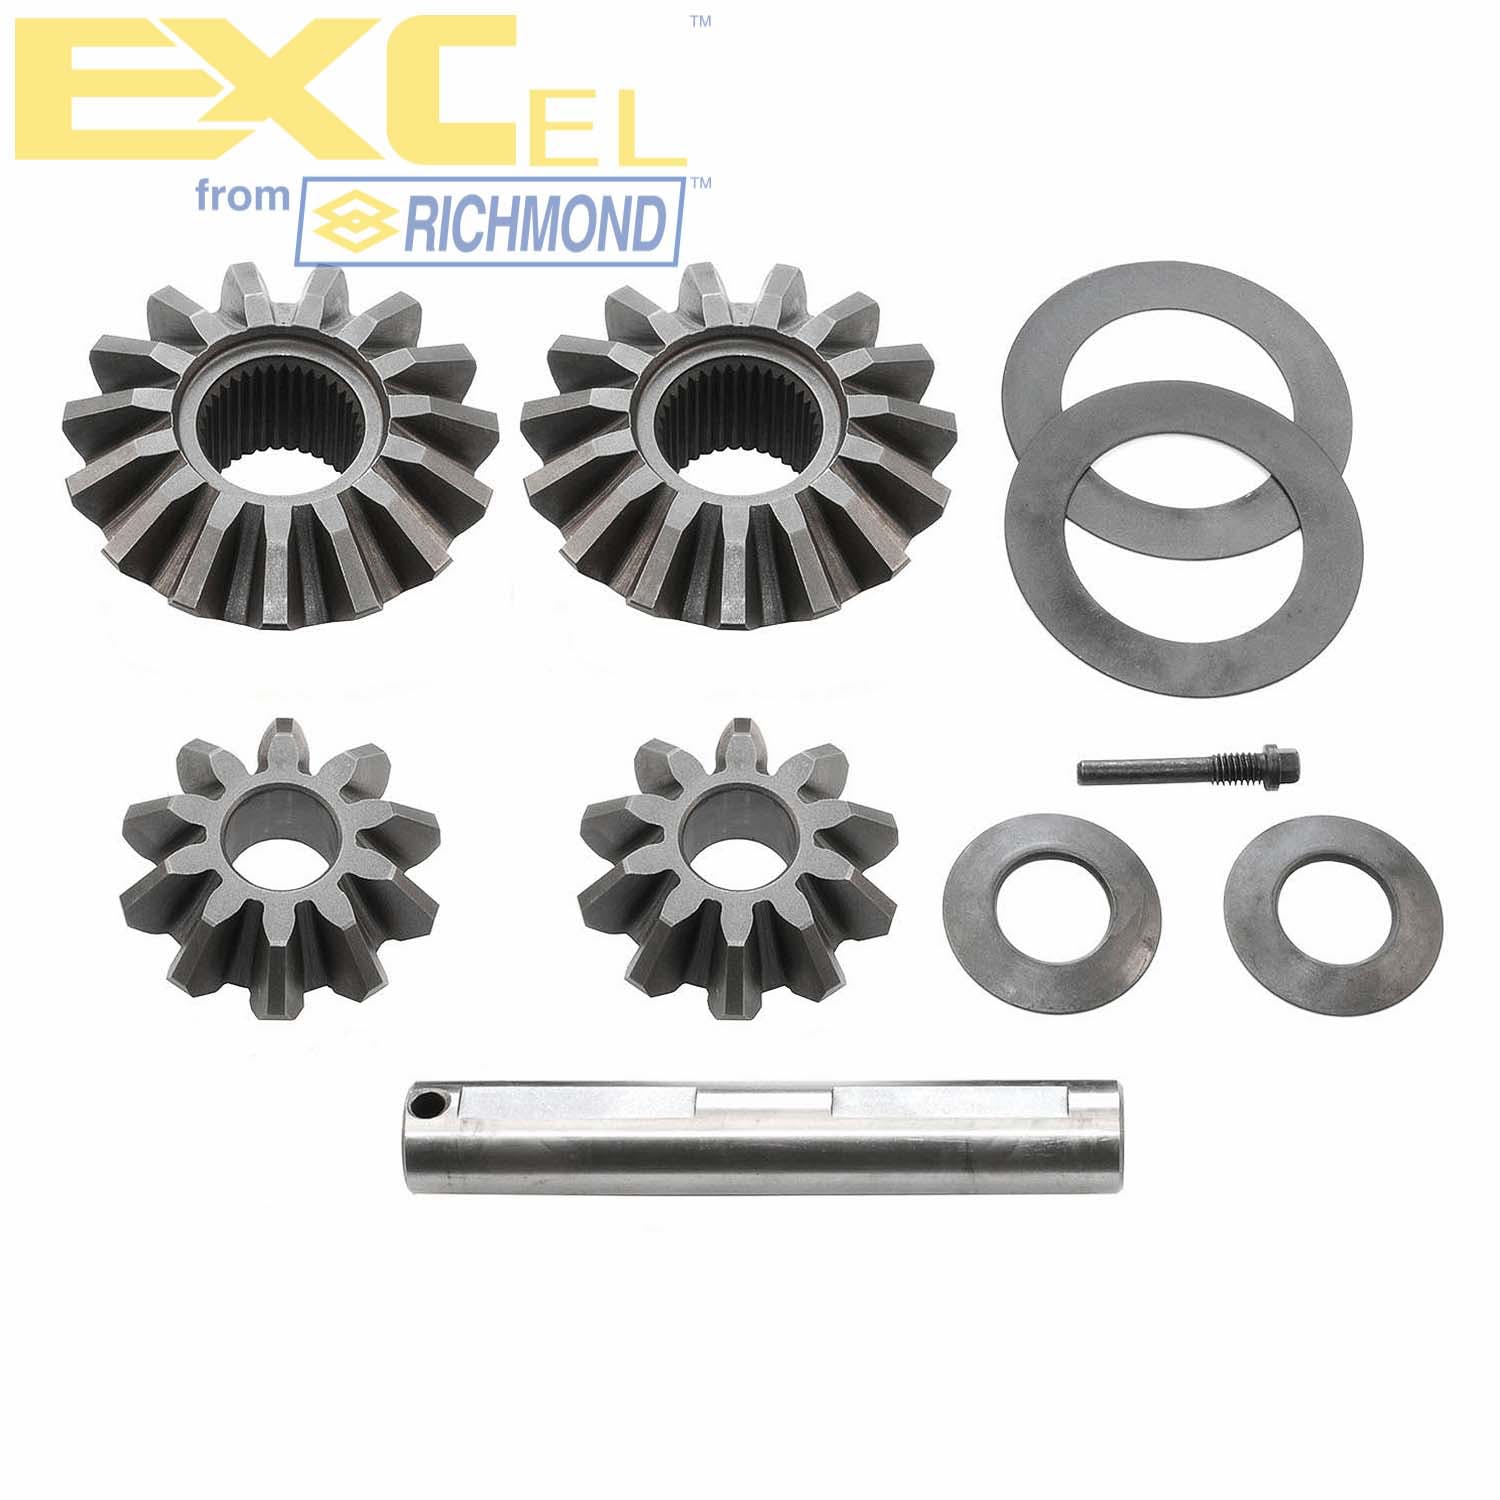 Excel XL-4010 Differential Carrier Gear Kit